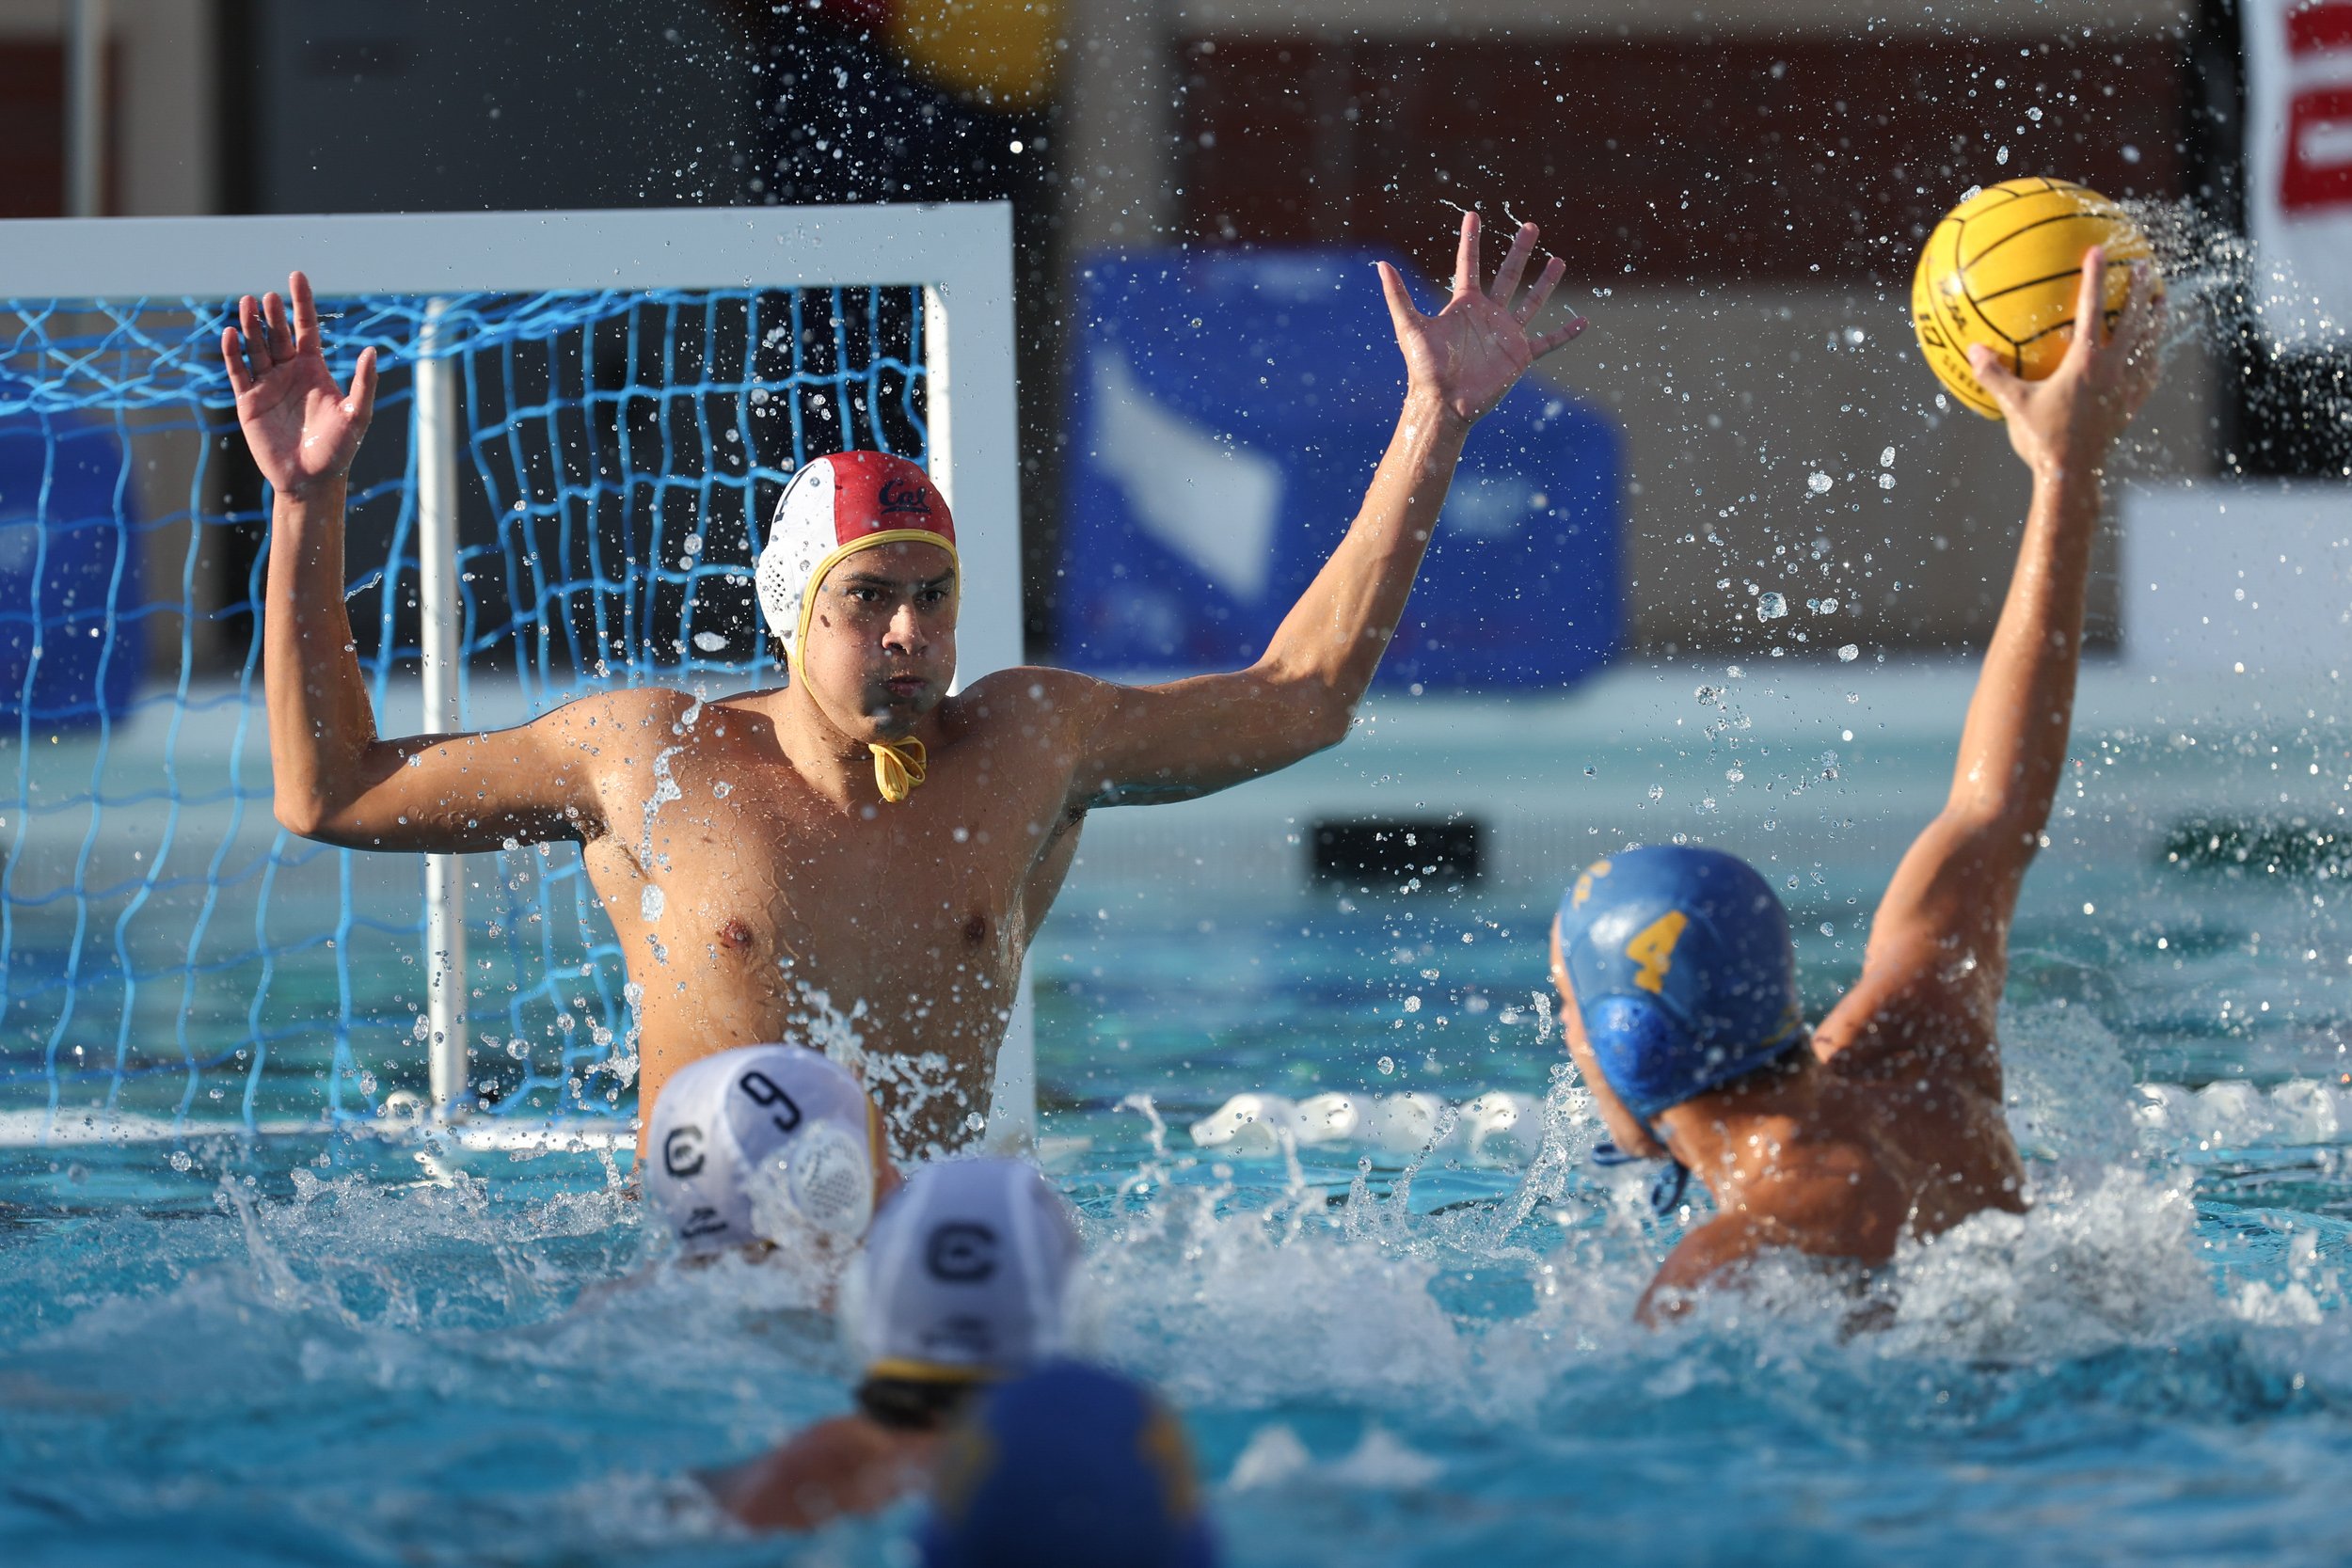  LOS ANGELES, CALIFORNIA - DECEMBER 3: Adrian Weinberg #1 of the California Golden Bears sets to defends a penalty shot from the UCLA Bruins during the National Collegiate Men's Water Polo Championship held at Uytengsu Aquatics Center on December 3, 